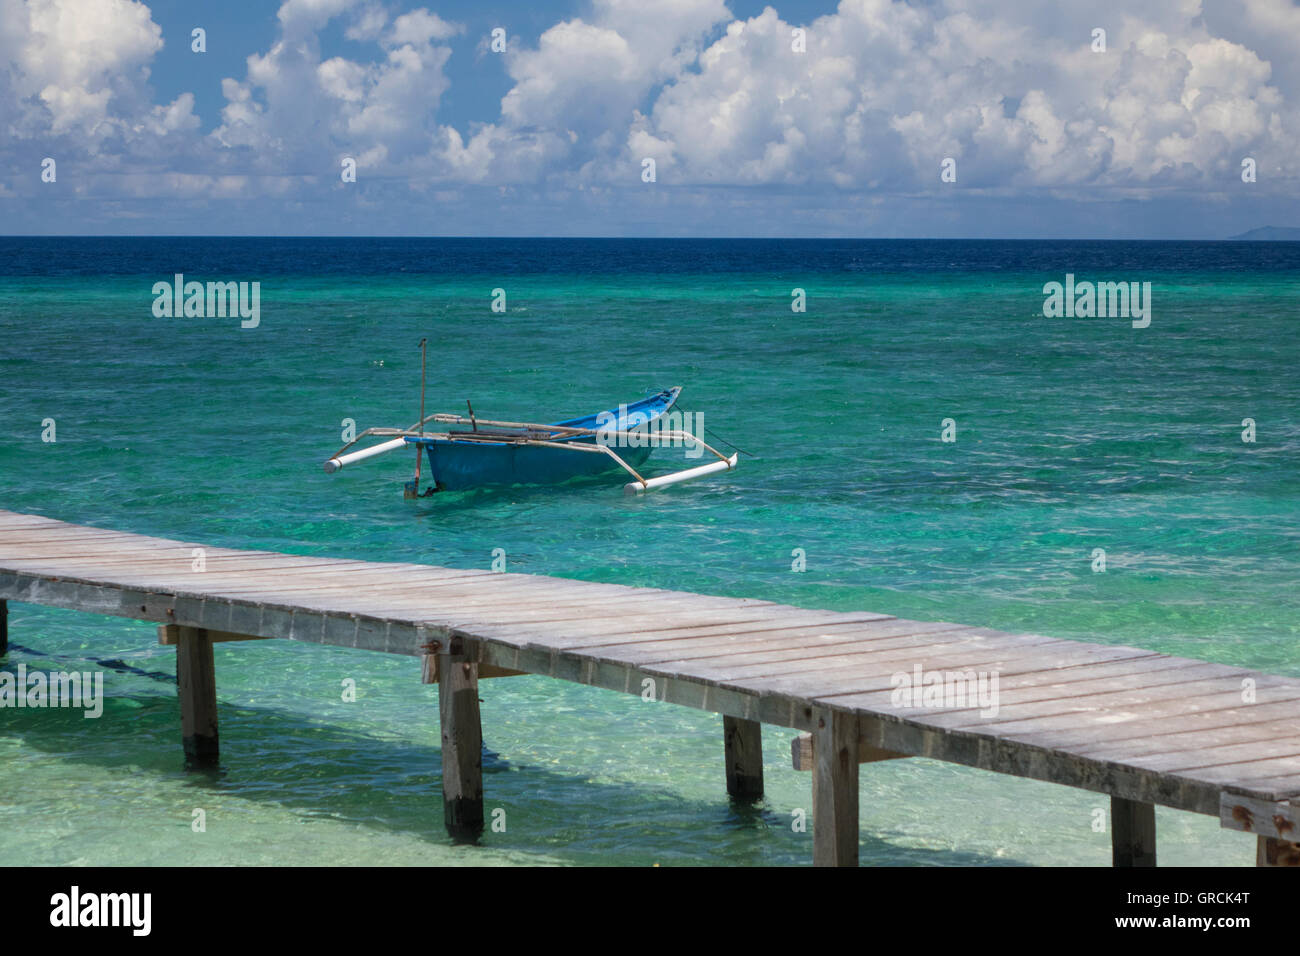 Indonesian Outrigger Canoe Near The Beach, Wooden Jetty In The Foreground, White Cumulus Clouds And Blue Sky In The Background Stock Photo